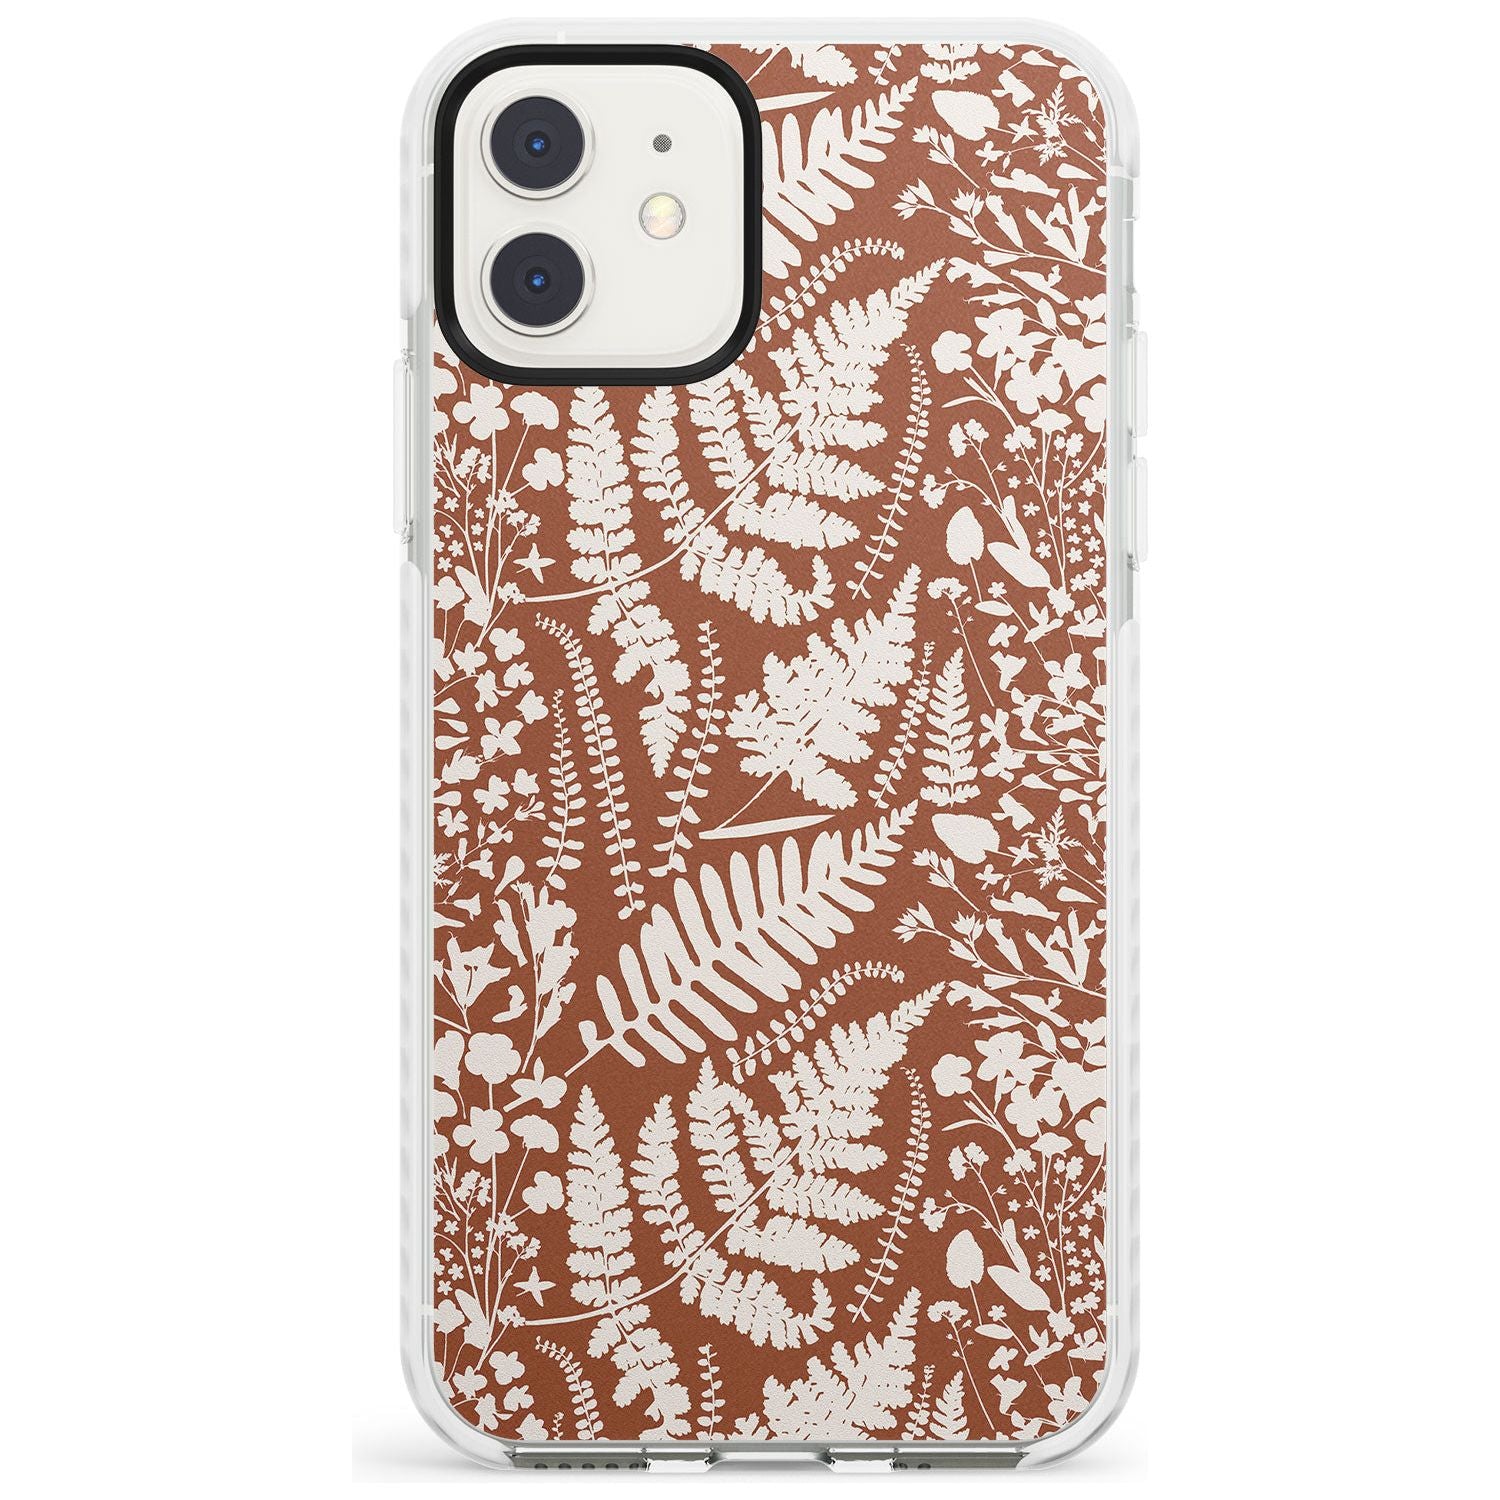 Wildflowers and Ferns on Terracotta Impact Phone Case for iPhone 11